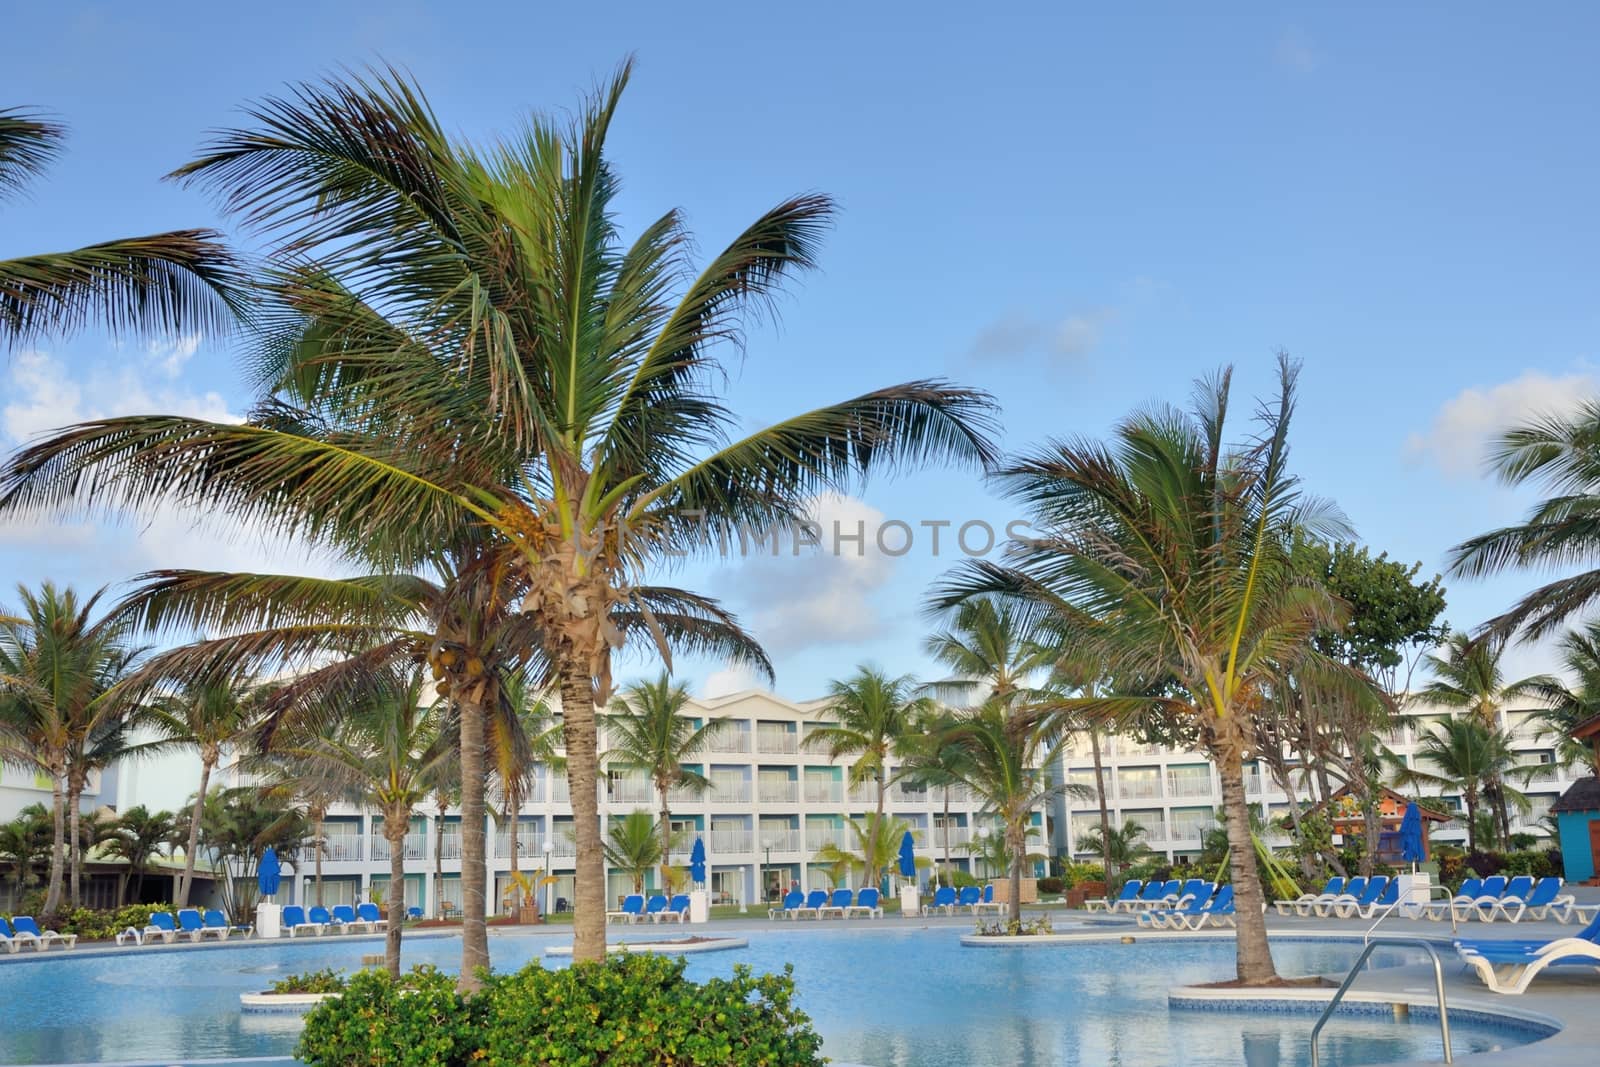 Caribbean hotel and pool by pauws99